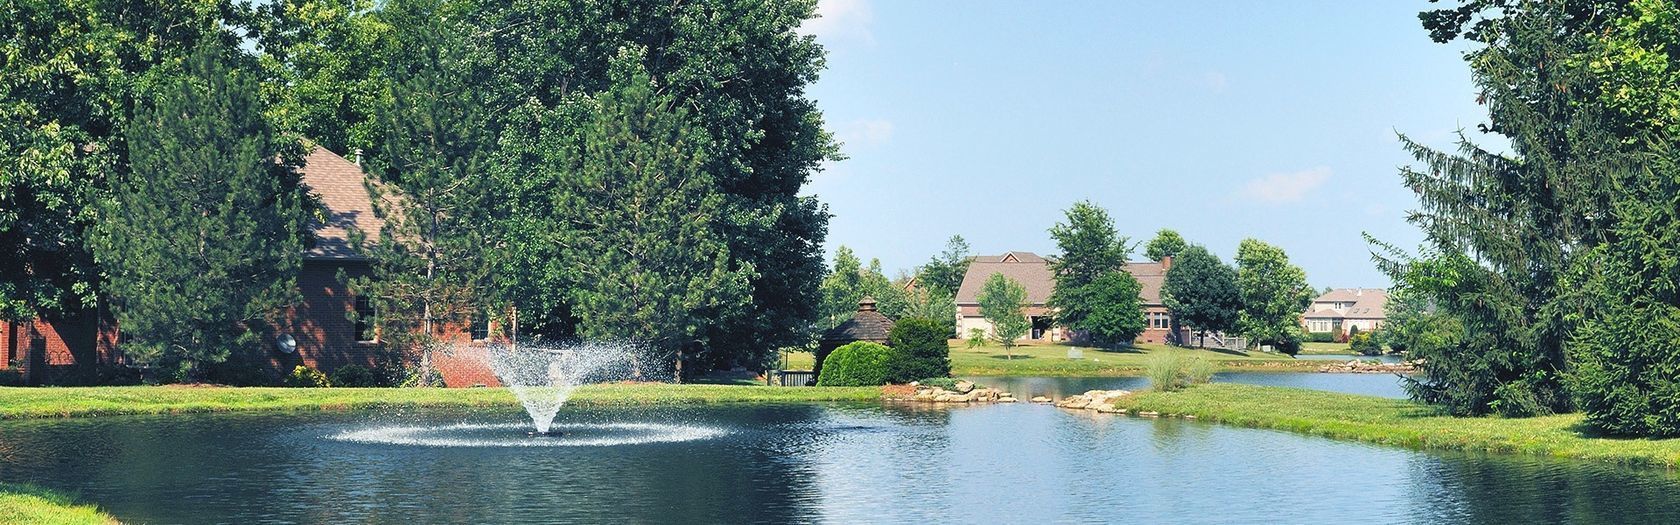 lake fountains and pond aeration and pond maintenance